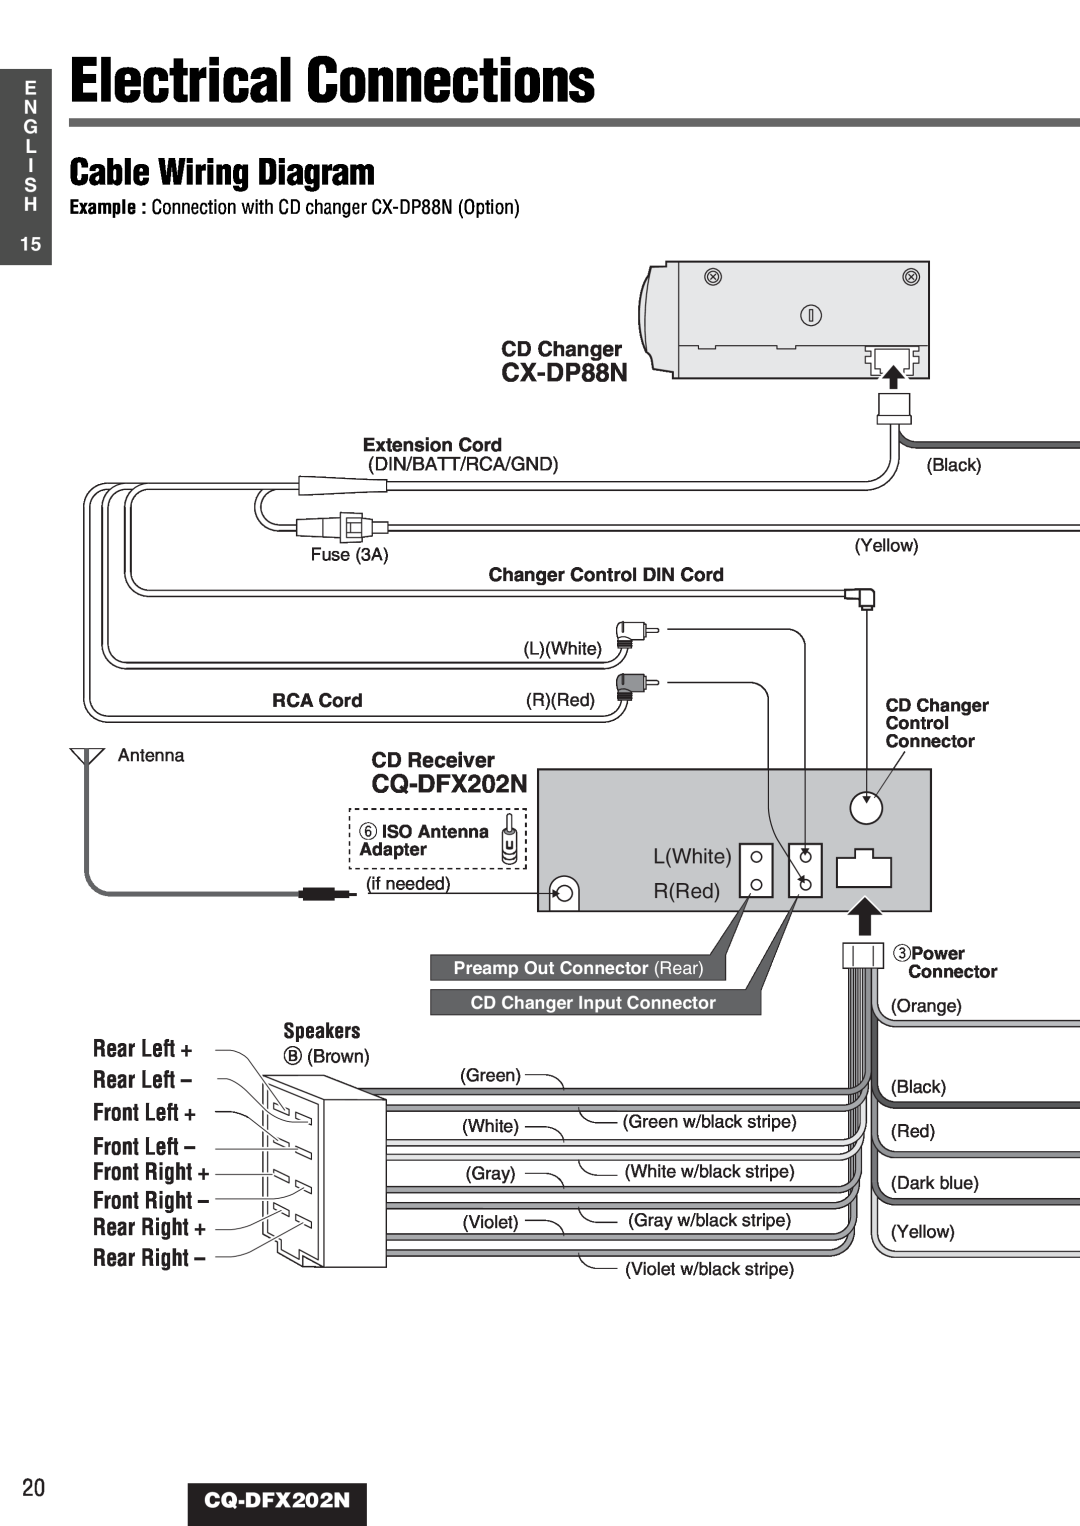 Panasonic CQ-DFX202N Electrical Connections, Cable Wiring Diagram, CX-DP88N, Rear Left +, Front Left +, Front Right + 